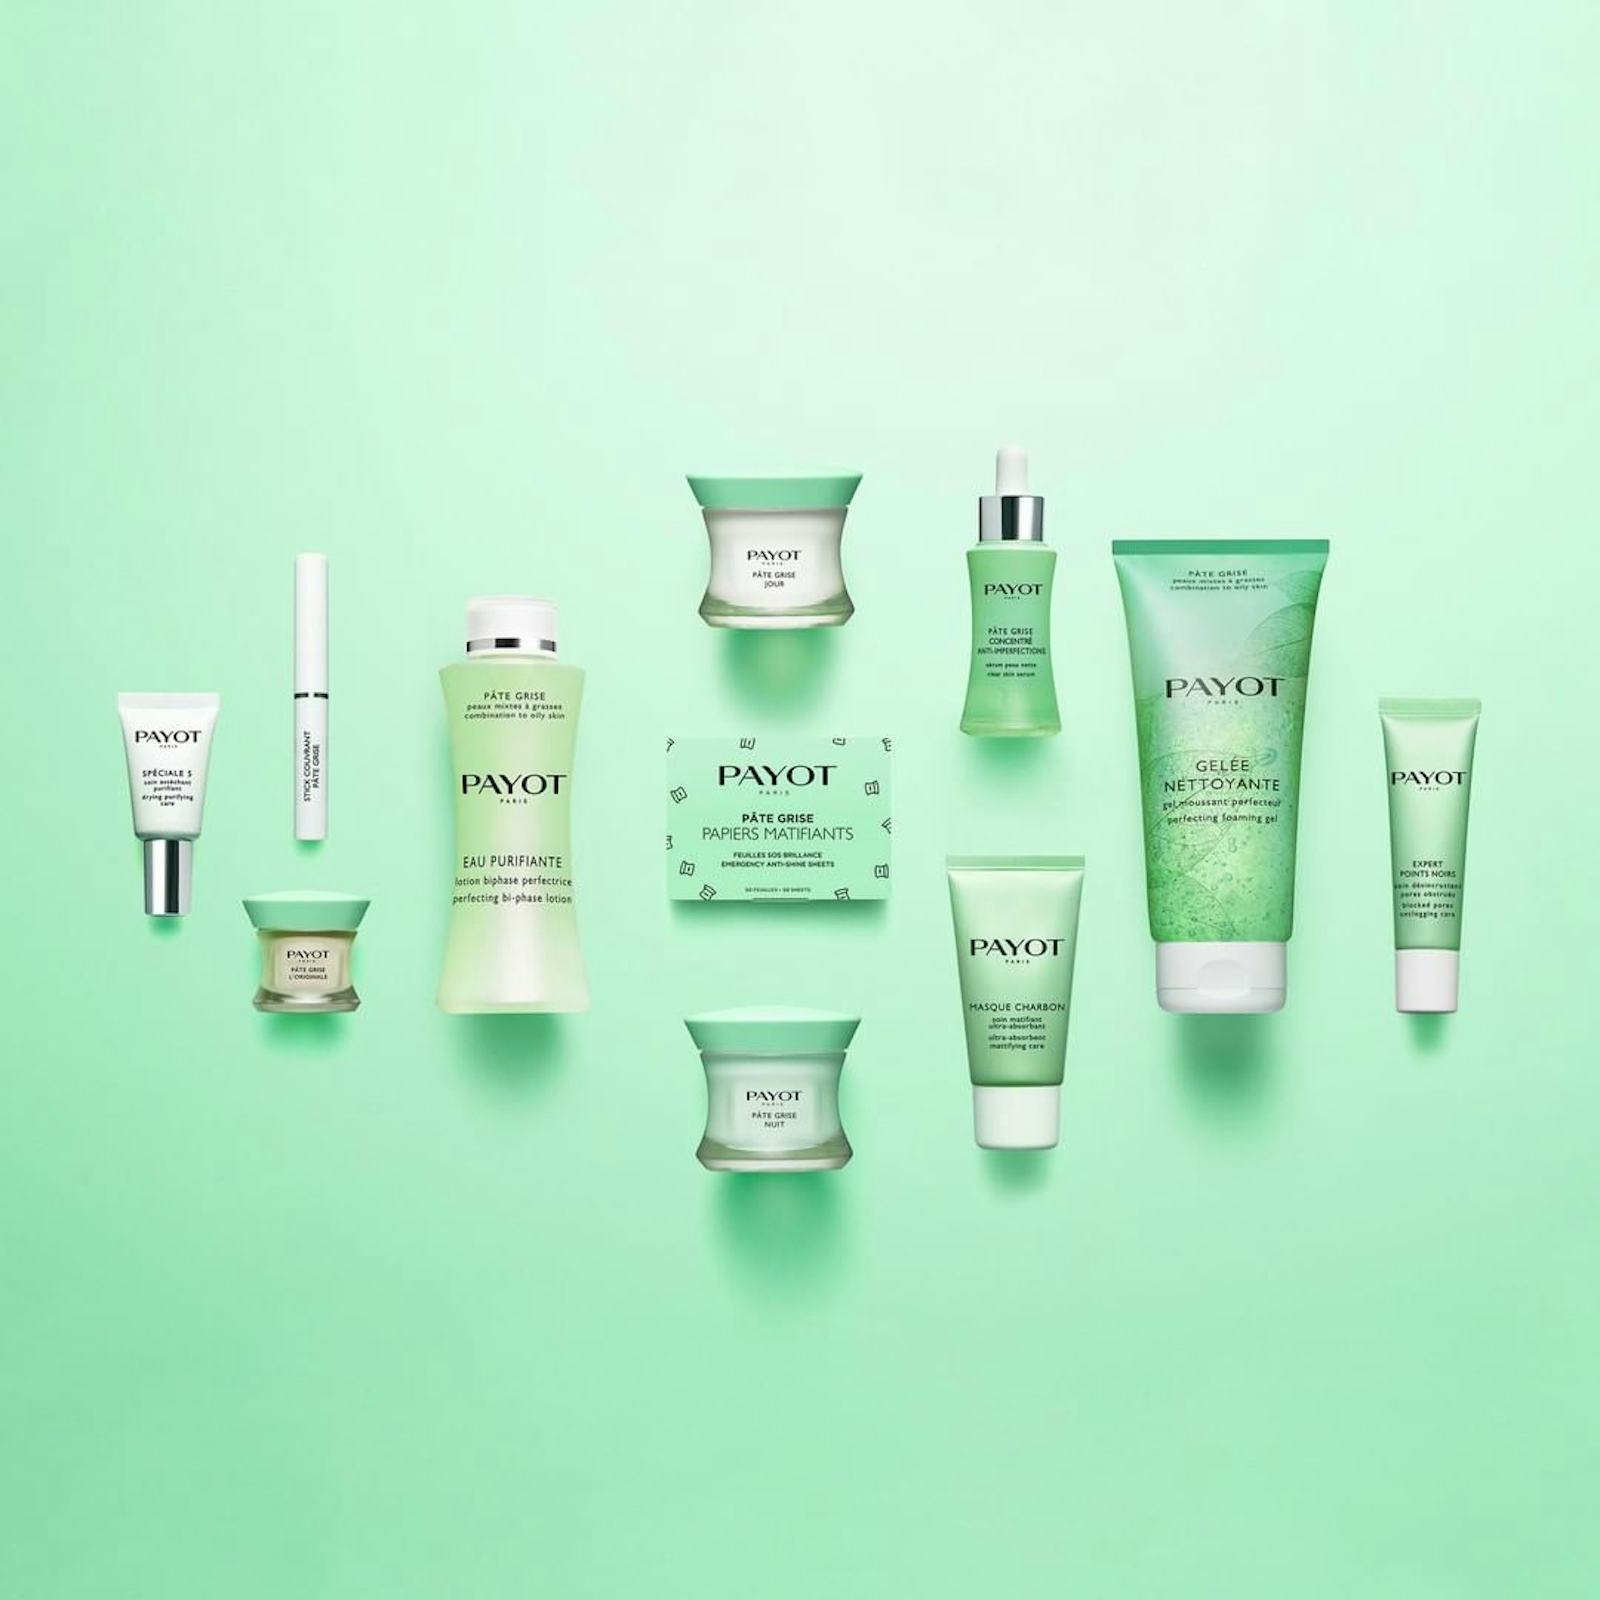 PAYOT's Advent Calendar Is Packed With French Skin Care Staples